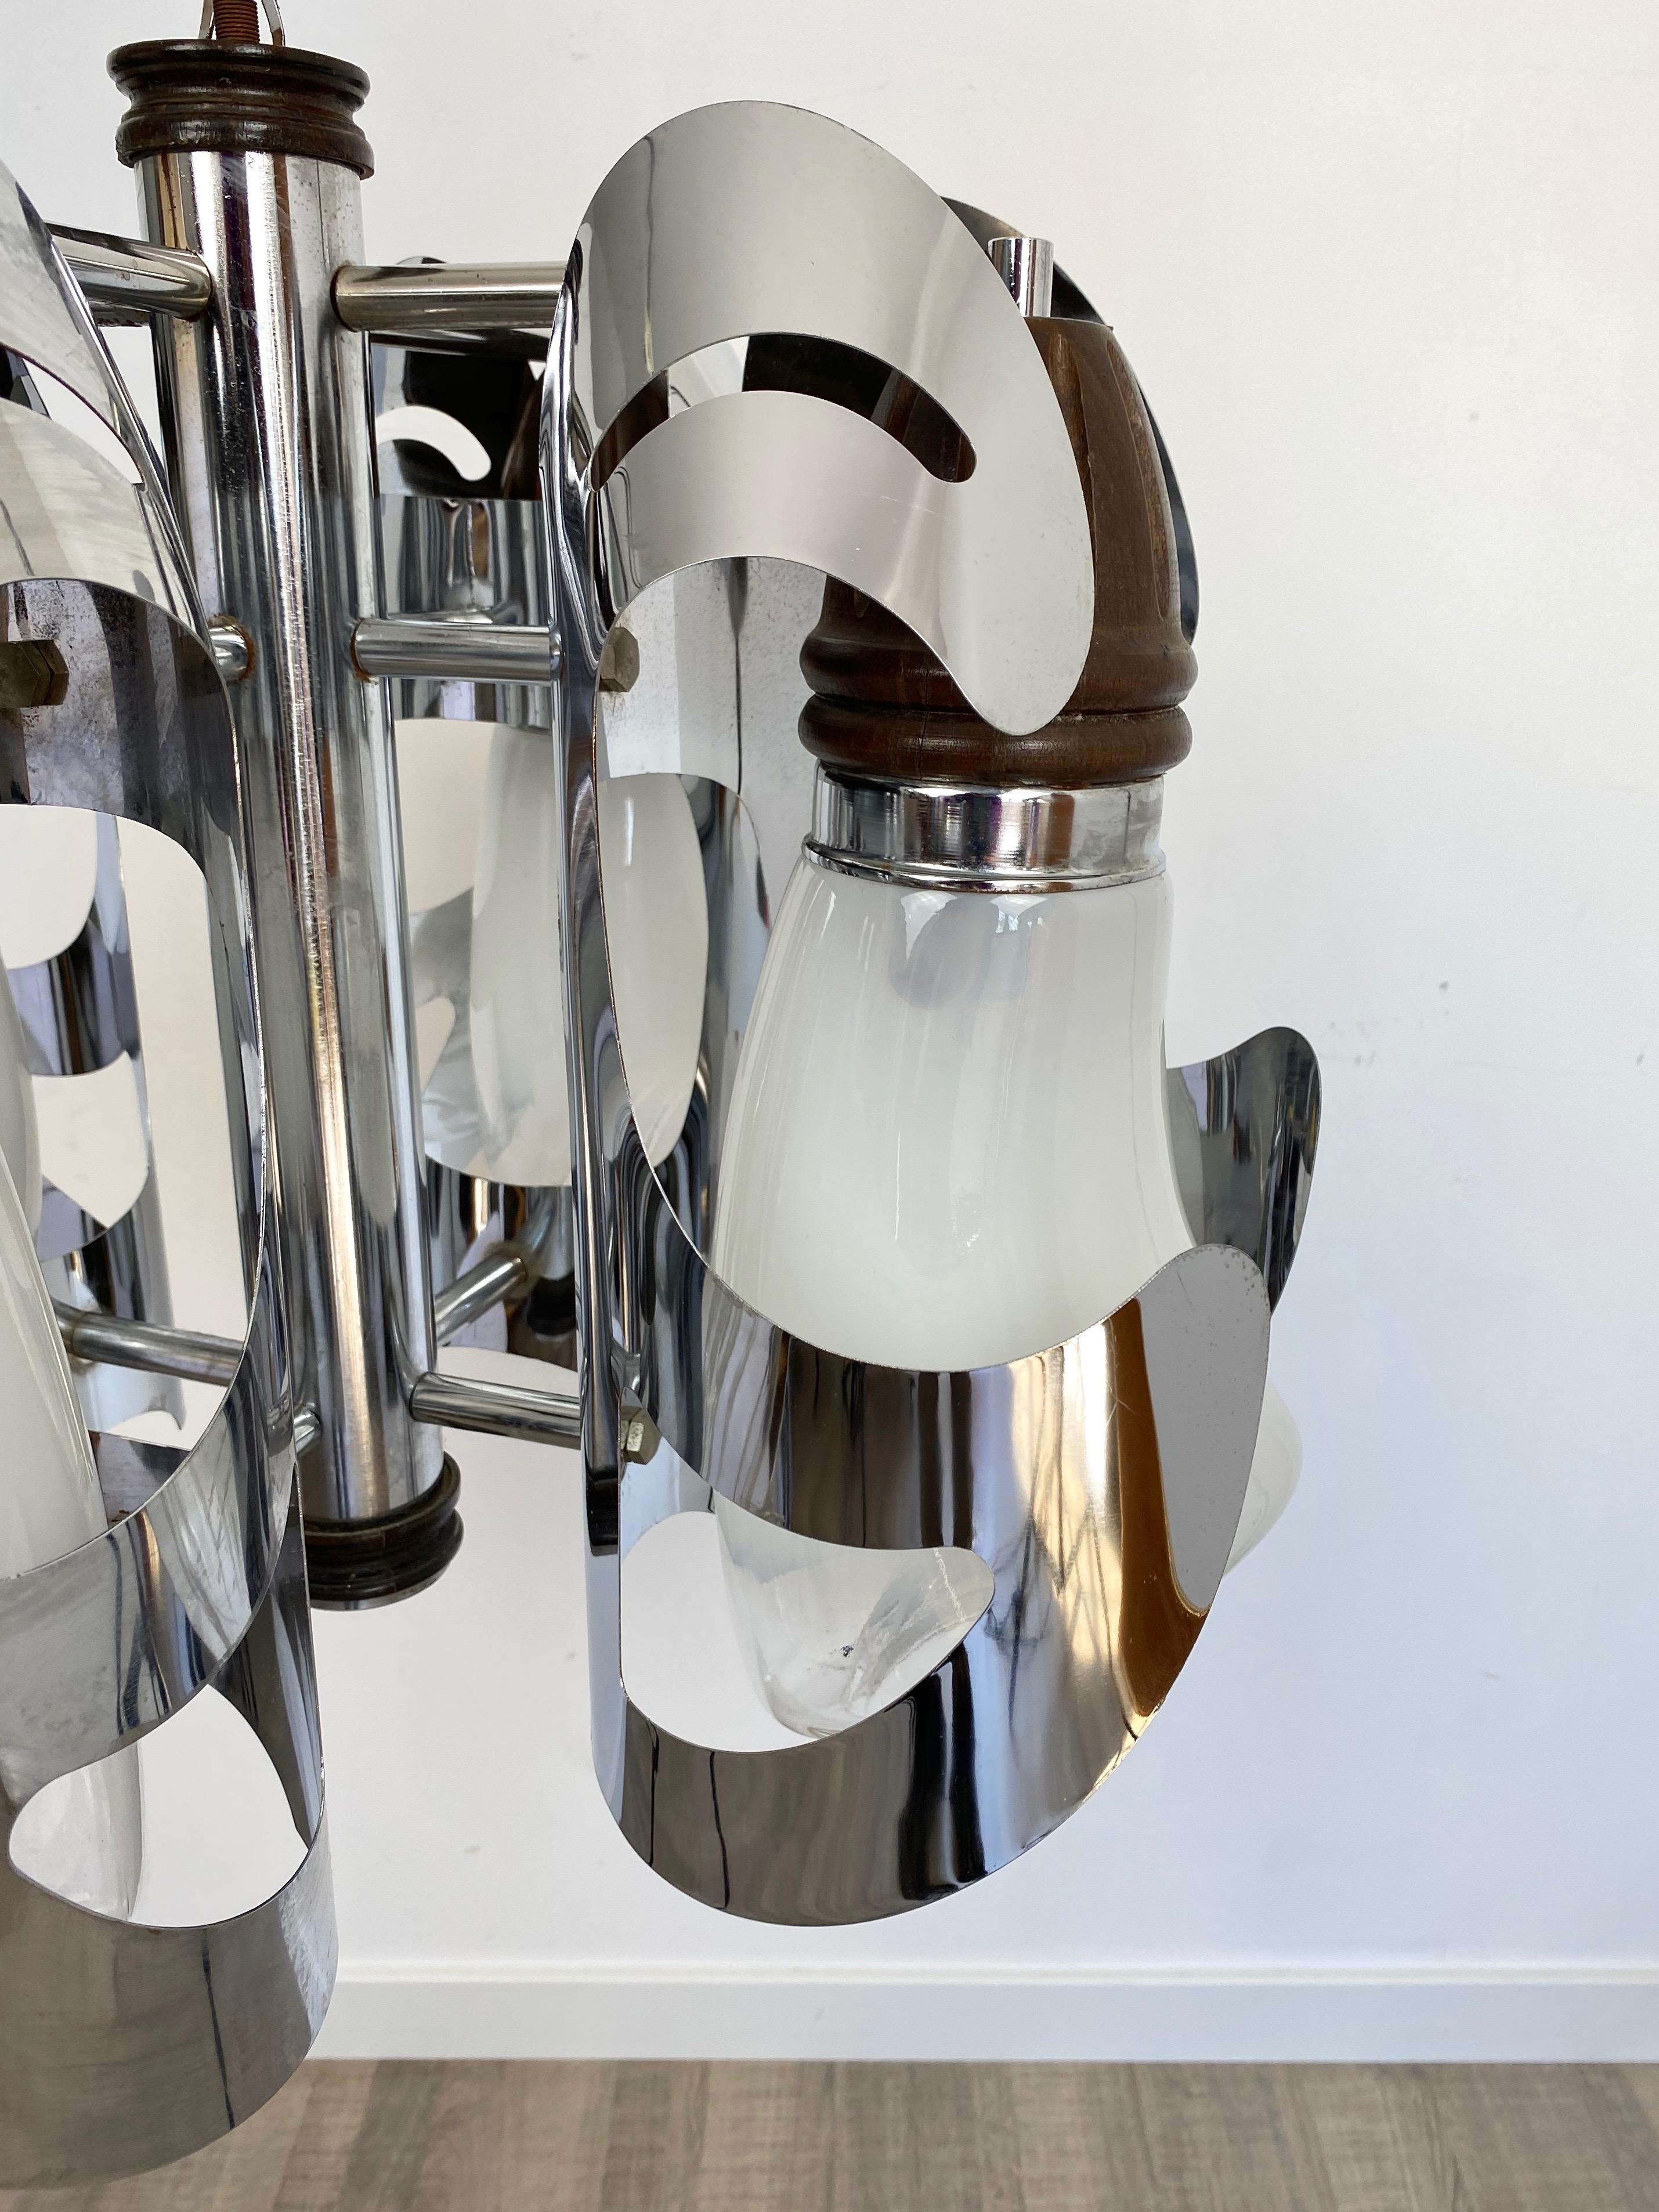 Chandelier by Mazzega Chrome, Wood and Murano Glass, Italy, 1970s For Sale 2